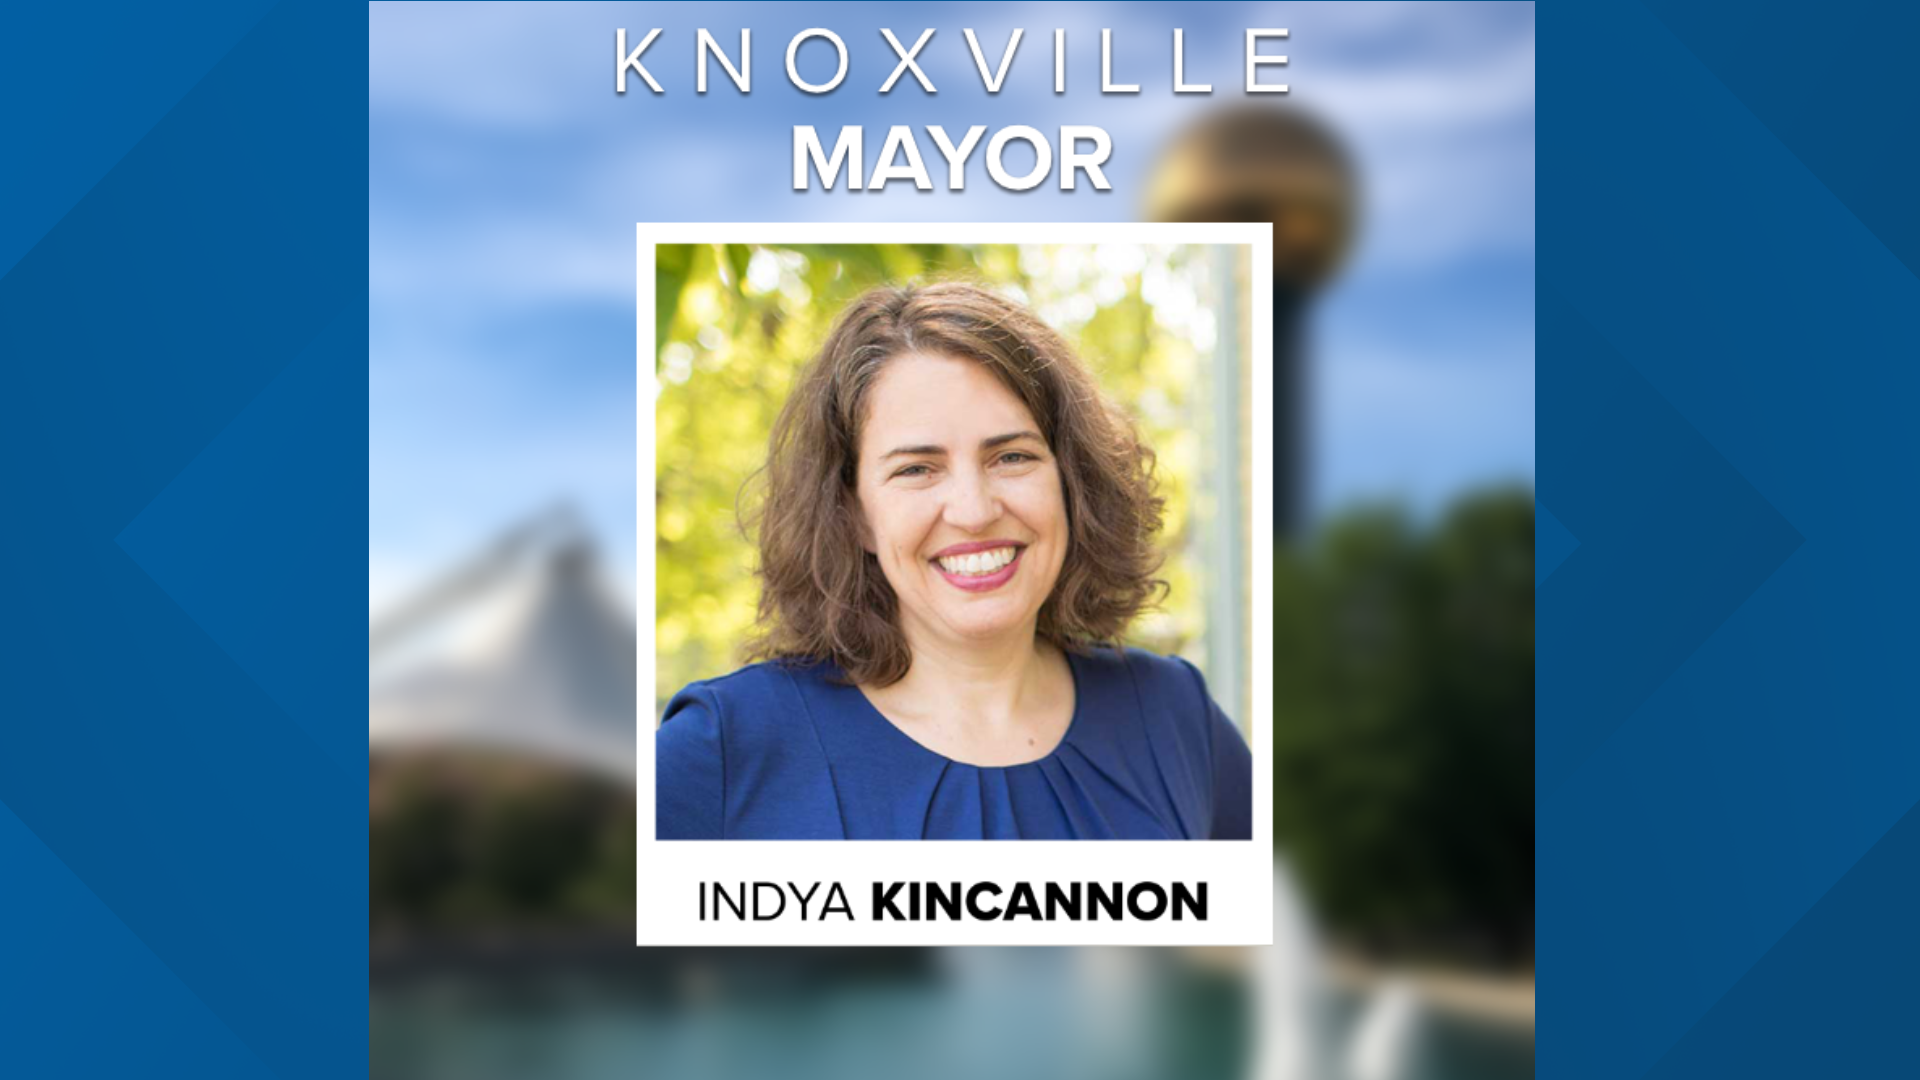 Kincannon won the Knoxville Mayoral election with 52% of the vote.